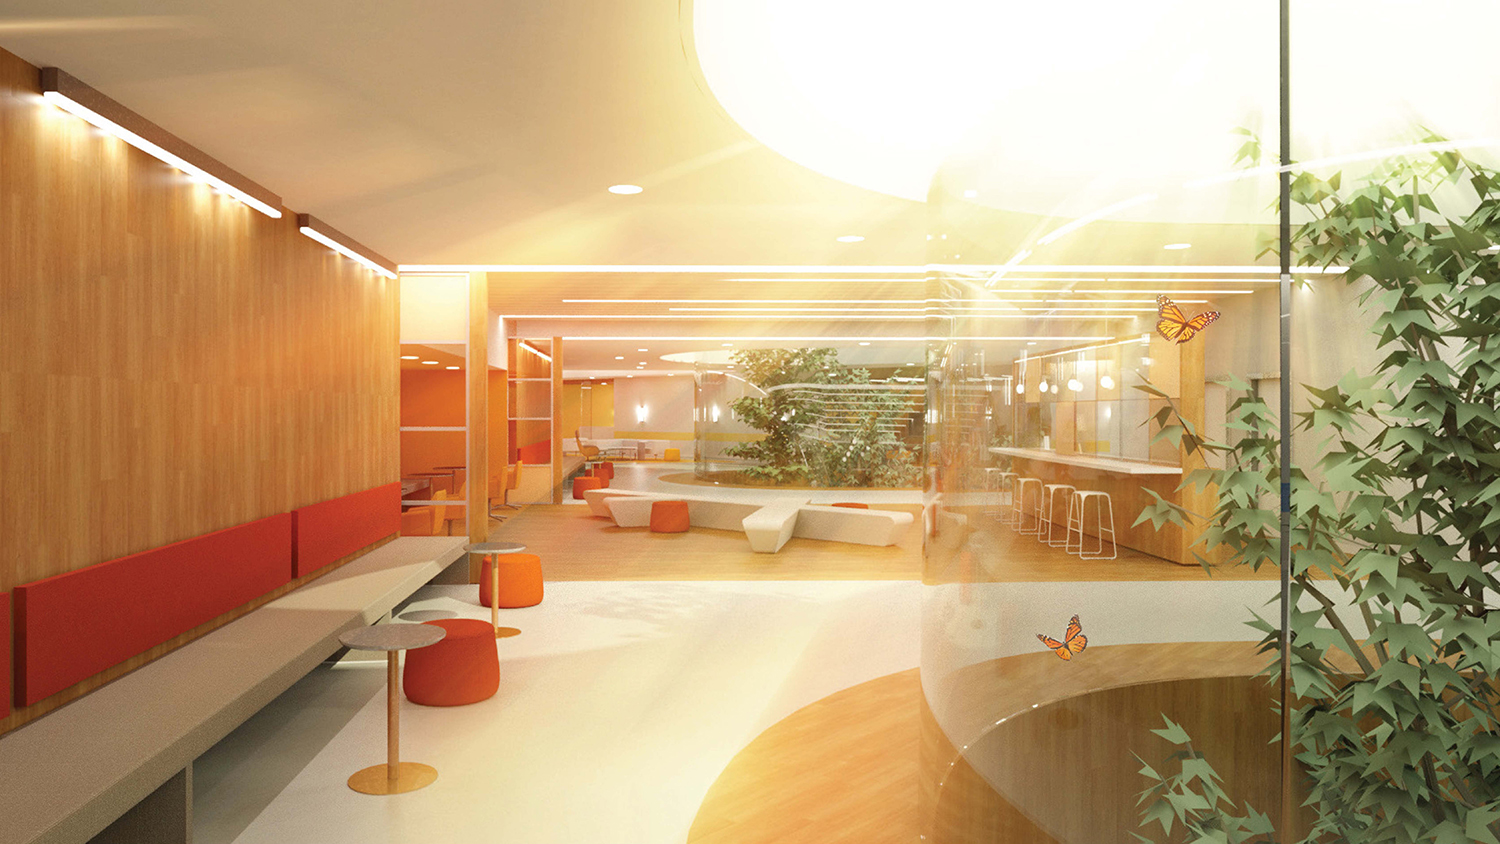 A rendering of an interior space